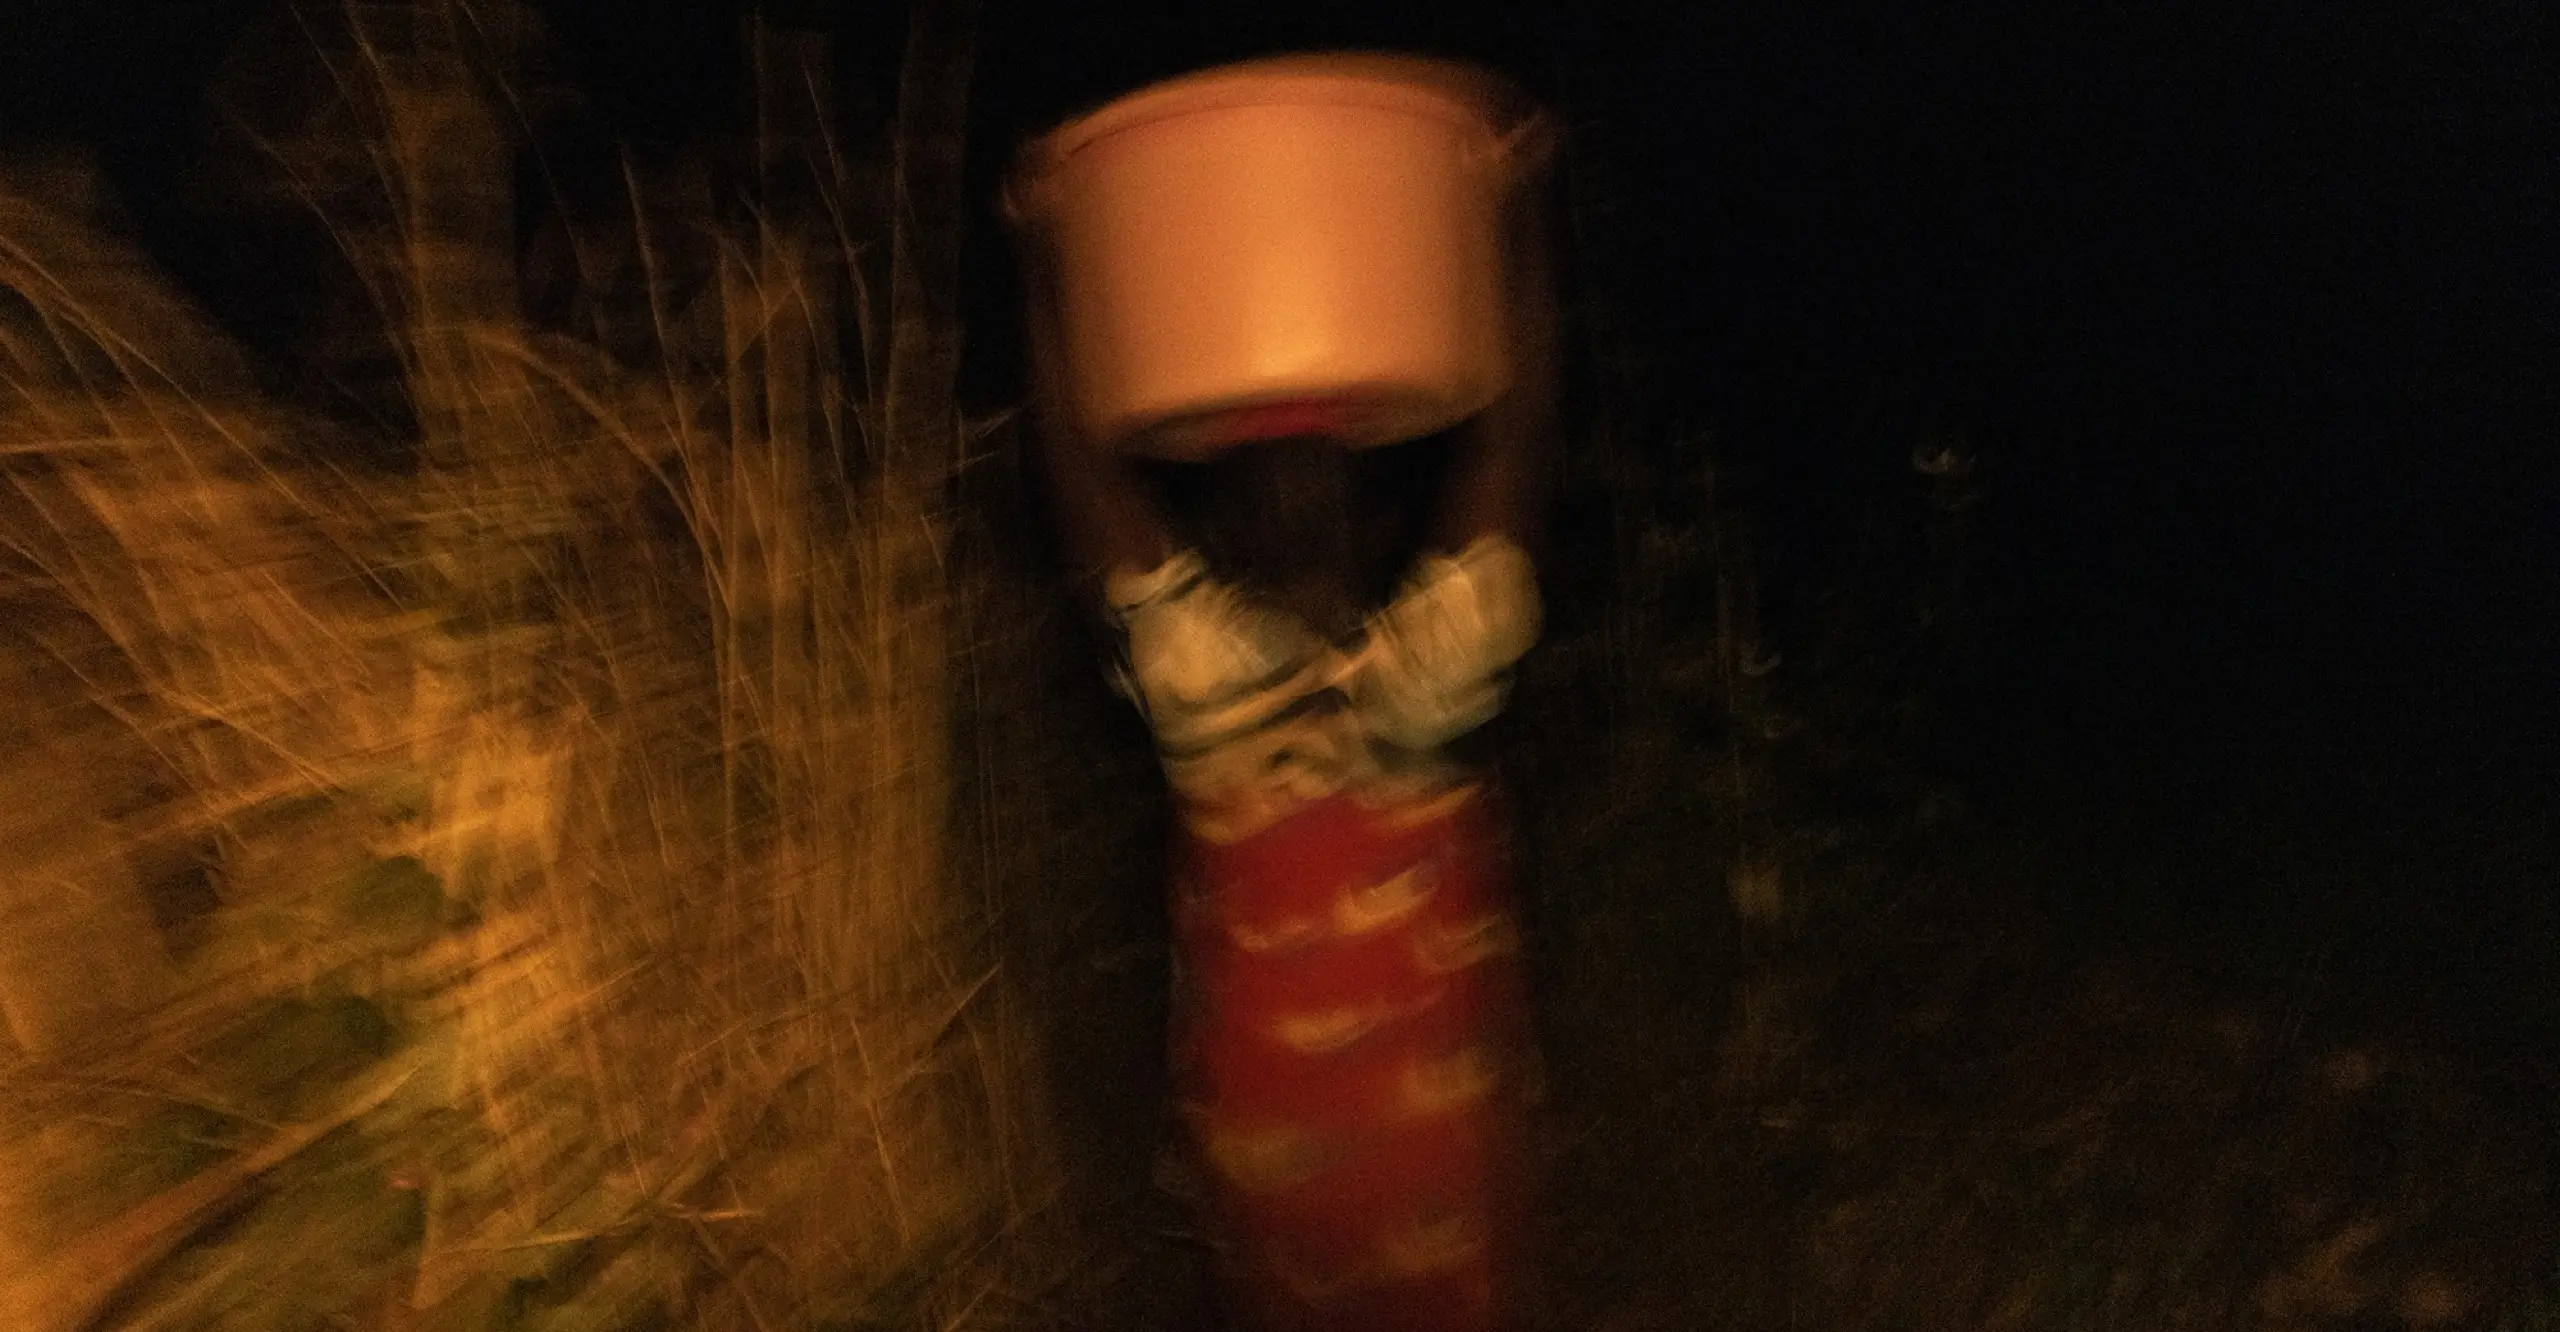 Blurred image of a person carrying a large orange bucket on their head in the darkness